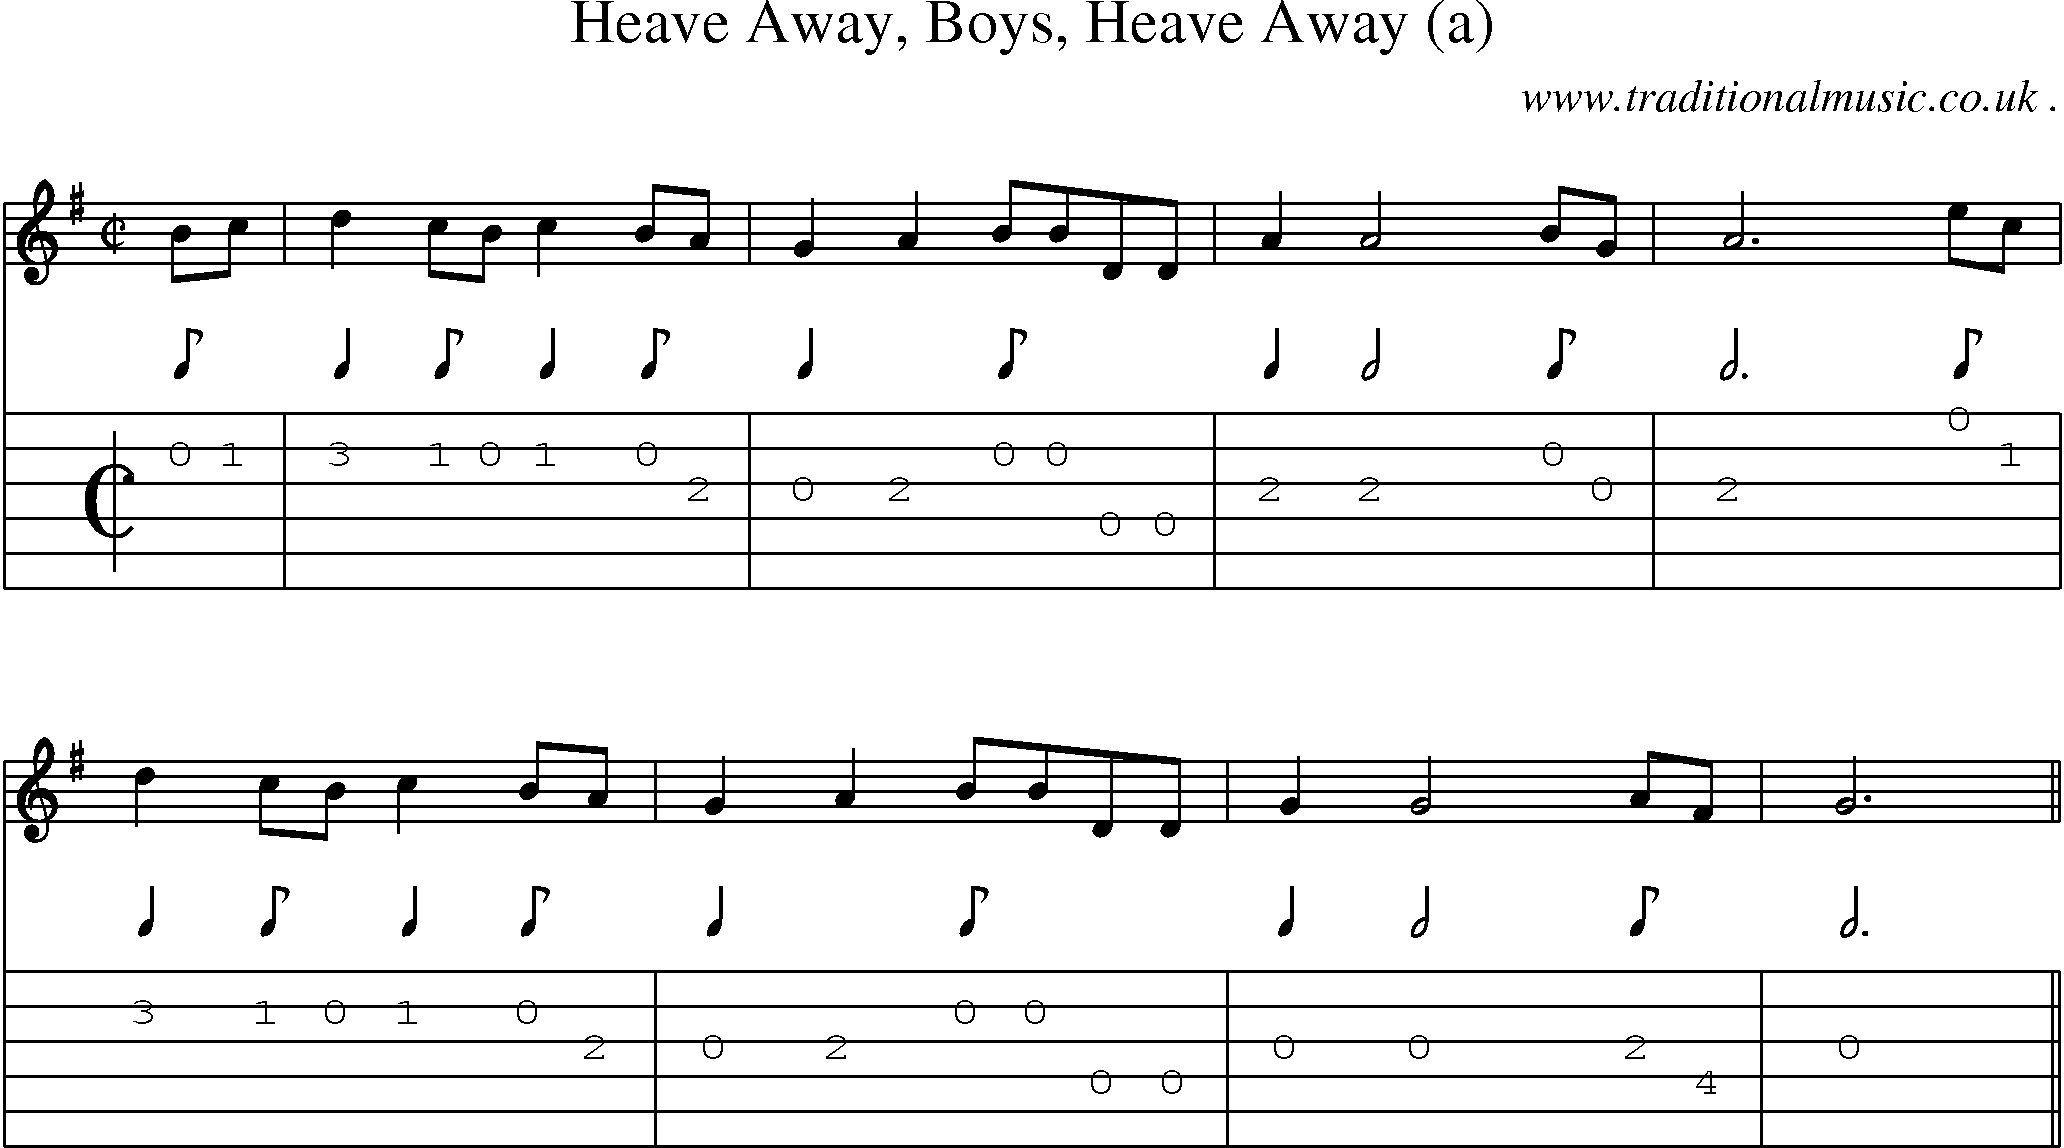 Sheet-Music and Guitar Tabs for Heave Away Boys Heave Away (a)